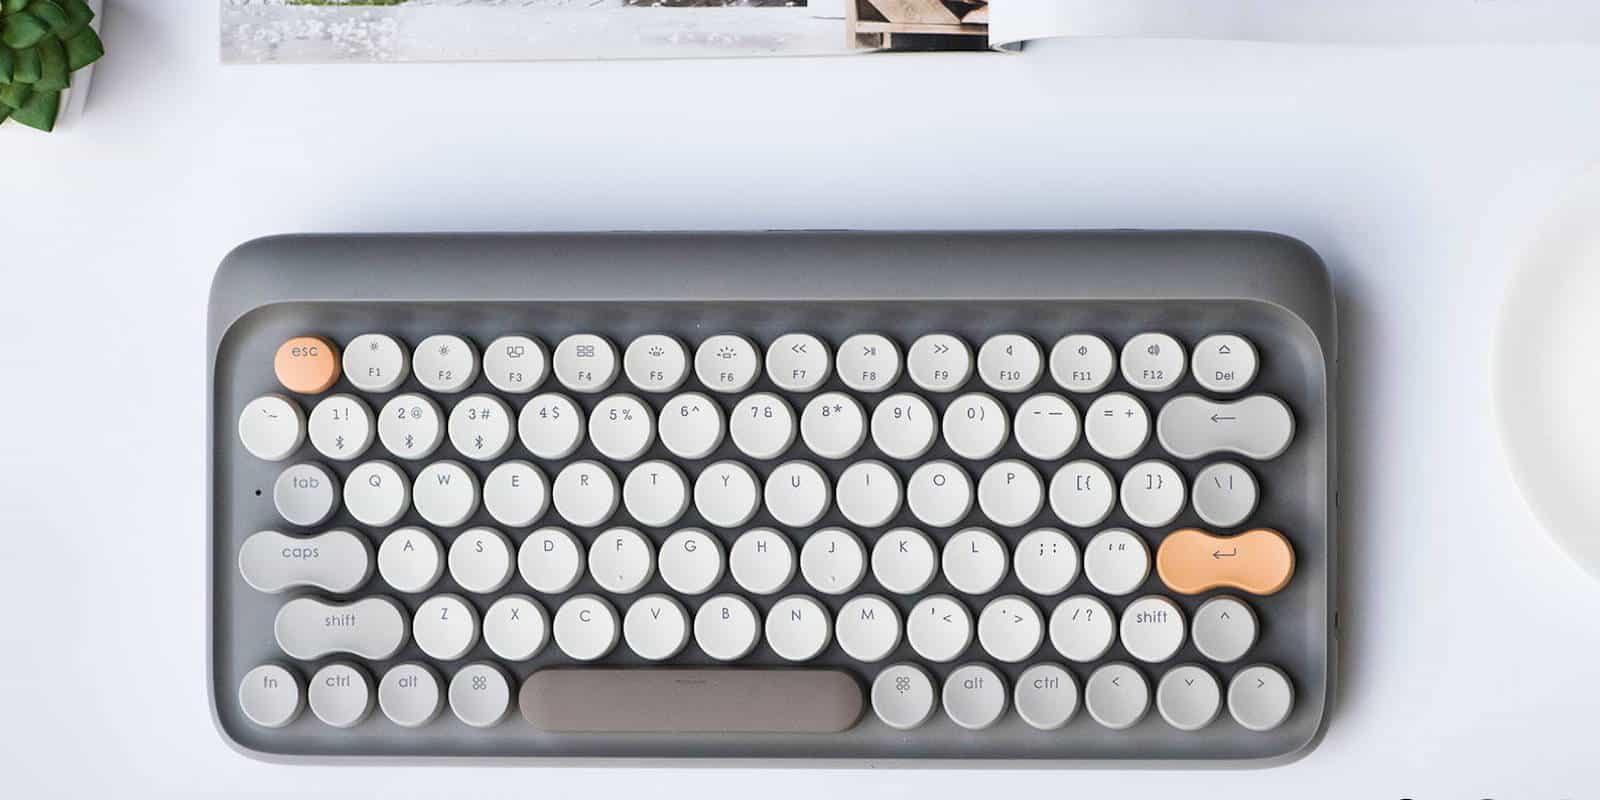 Get the feel of a classic mechanical keyboard under your fingers again.